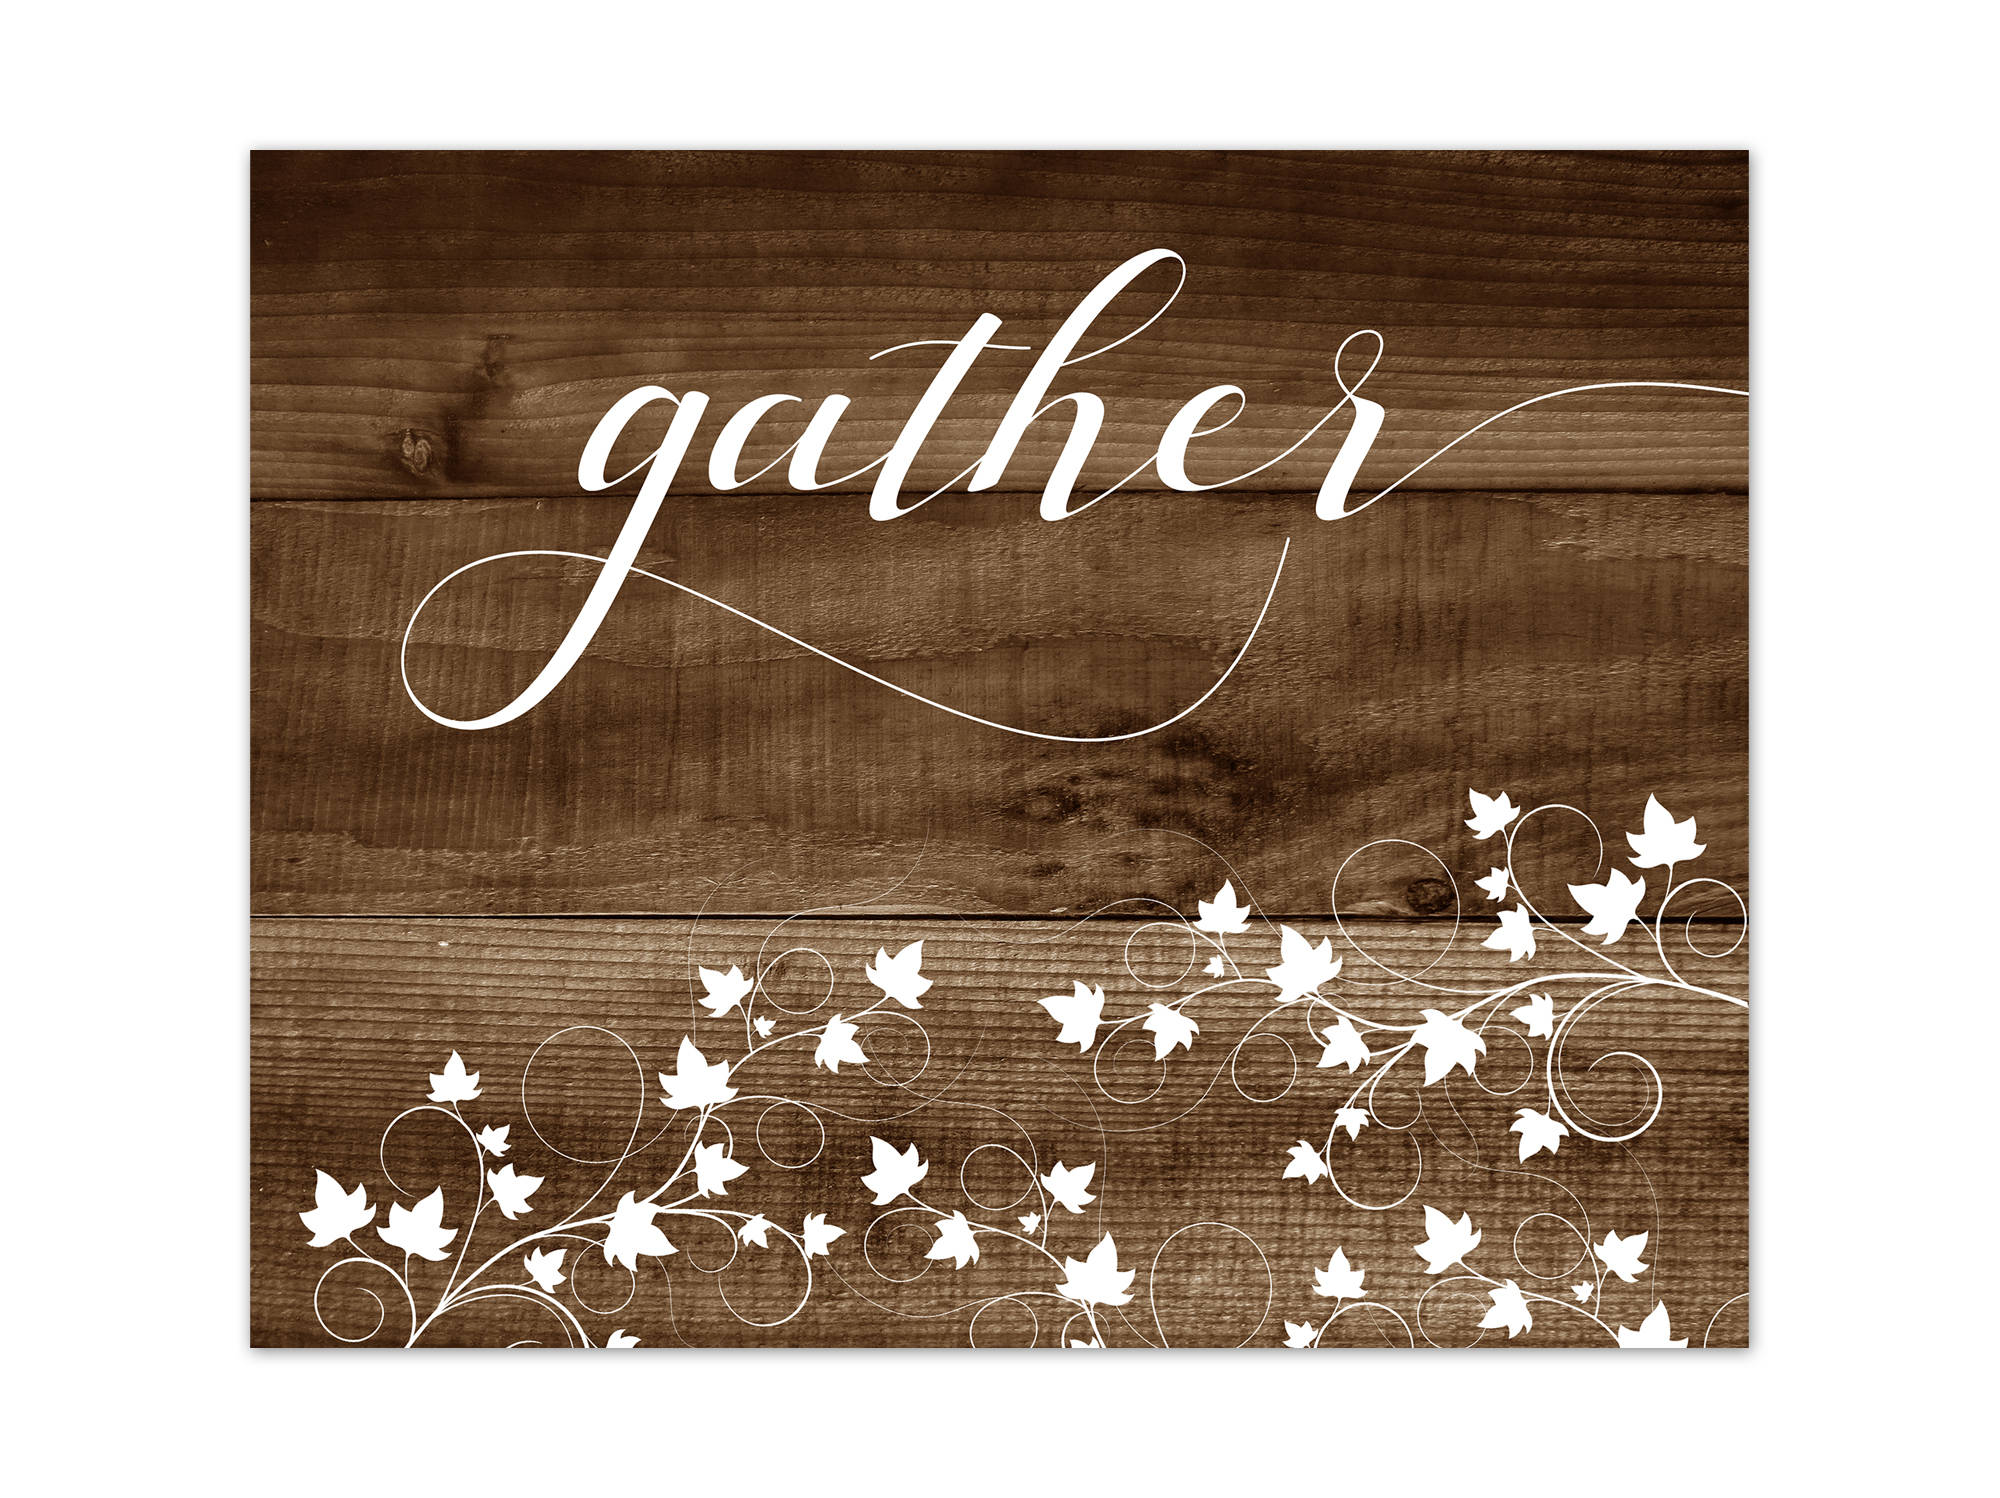 Brown Farmhouse Wall Art for Kitchen, Dining Room, Living Room - "Gather" Sign - HOME284